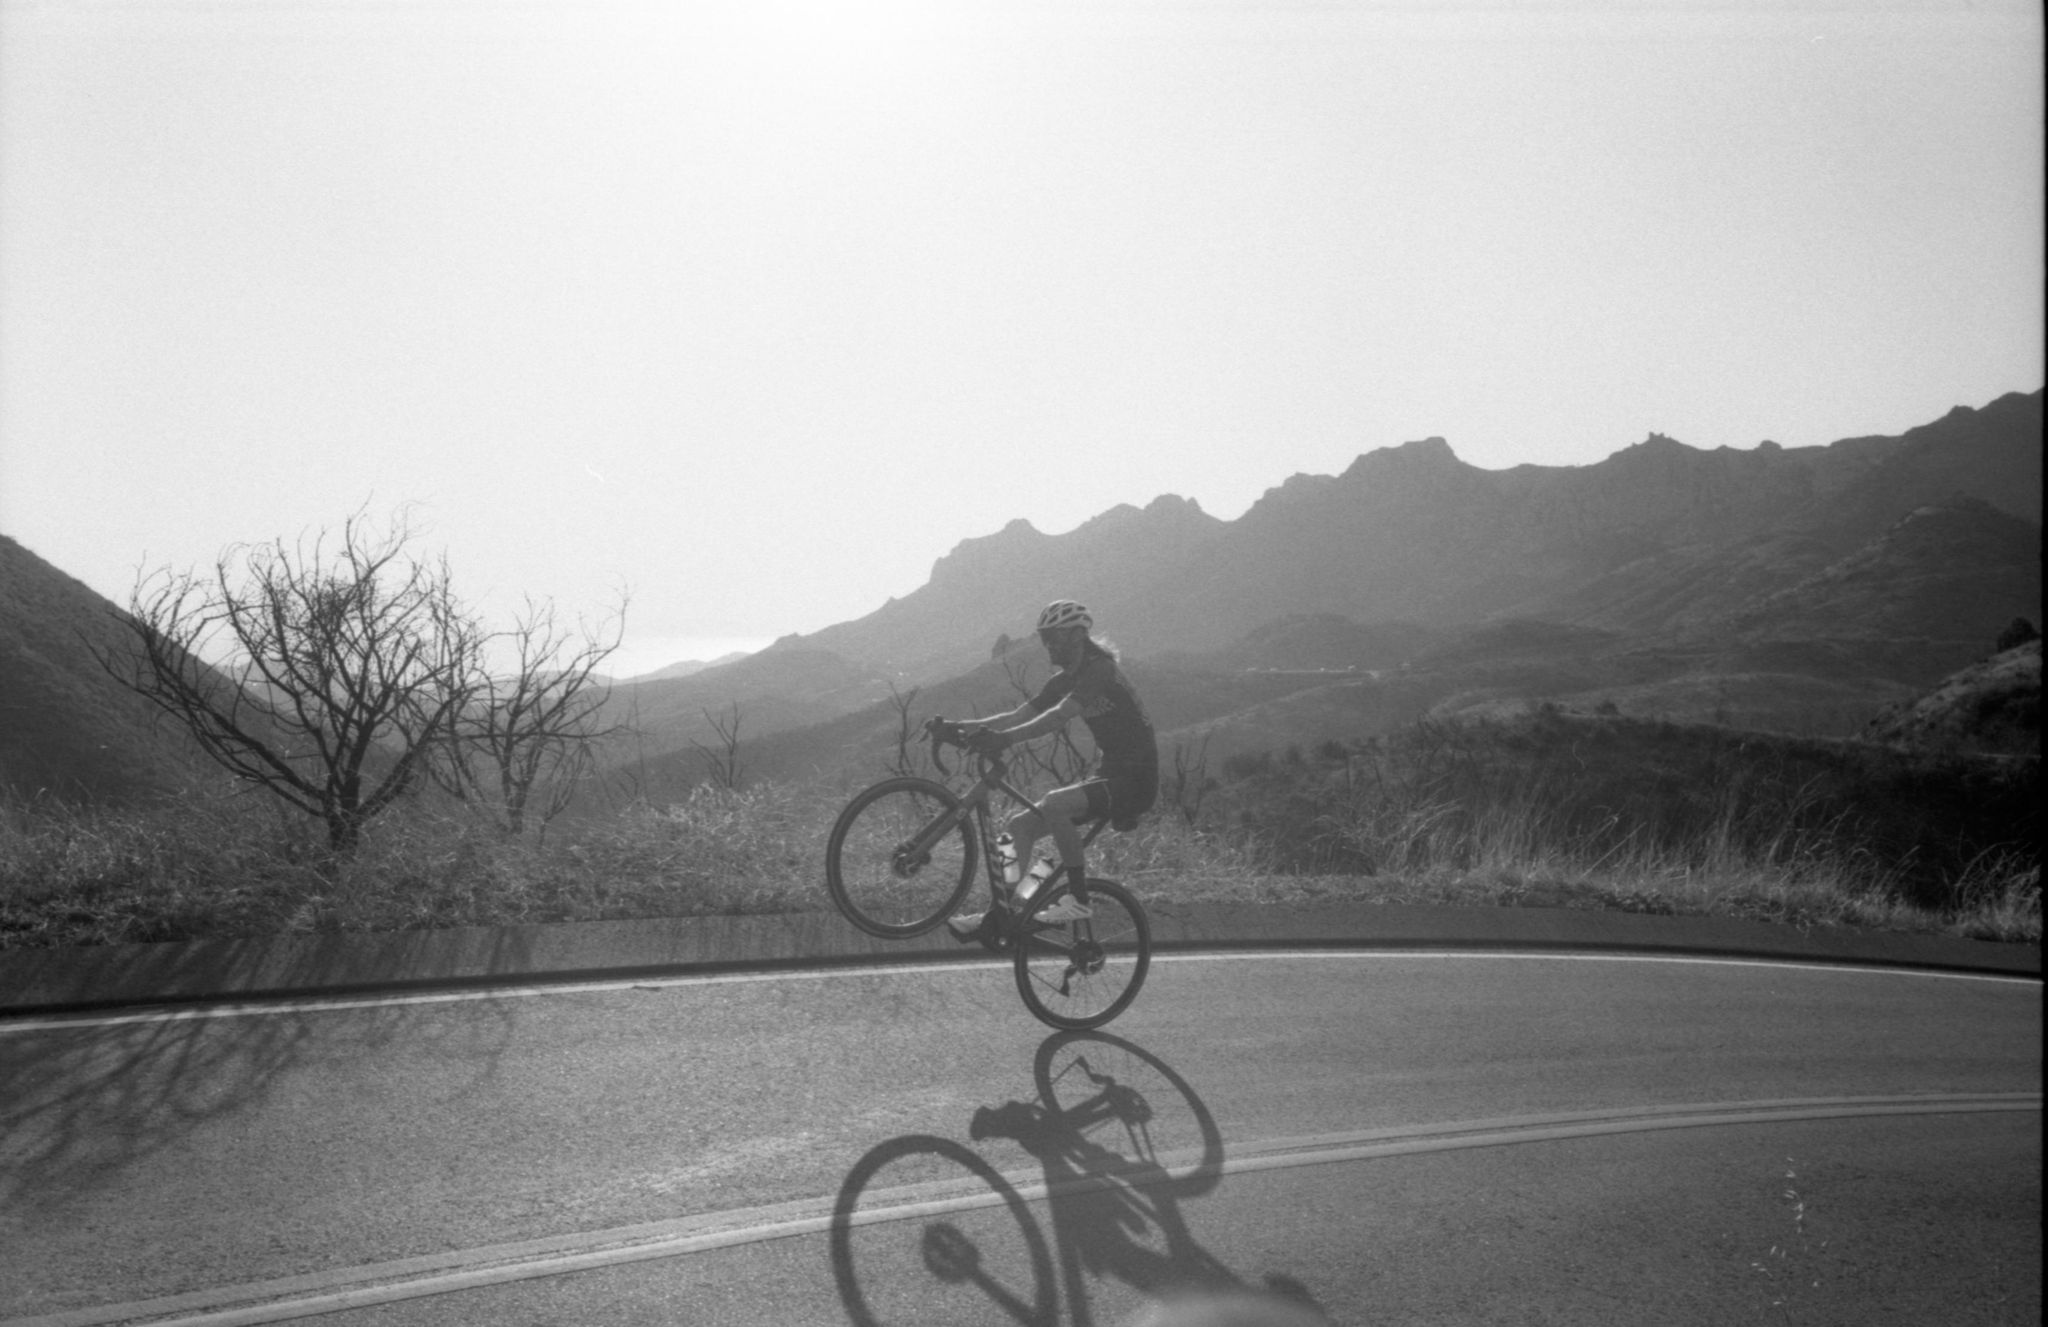 brian “safa” wagner riding deer creek in los angeles, ca in march 2021 